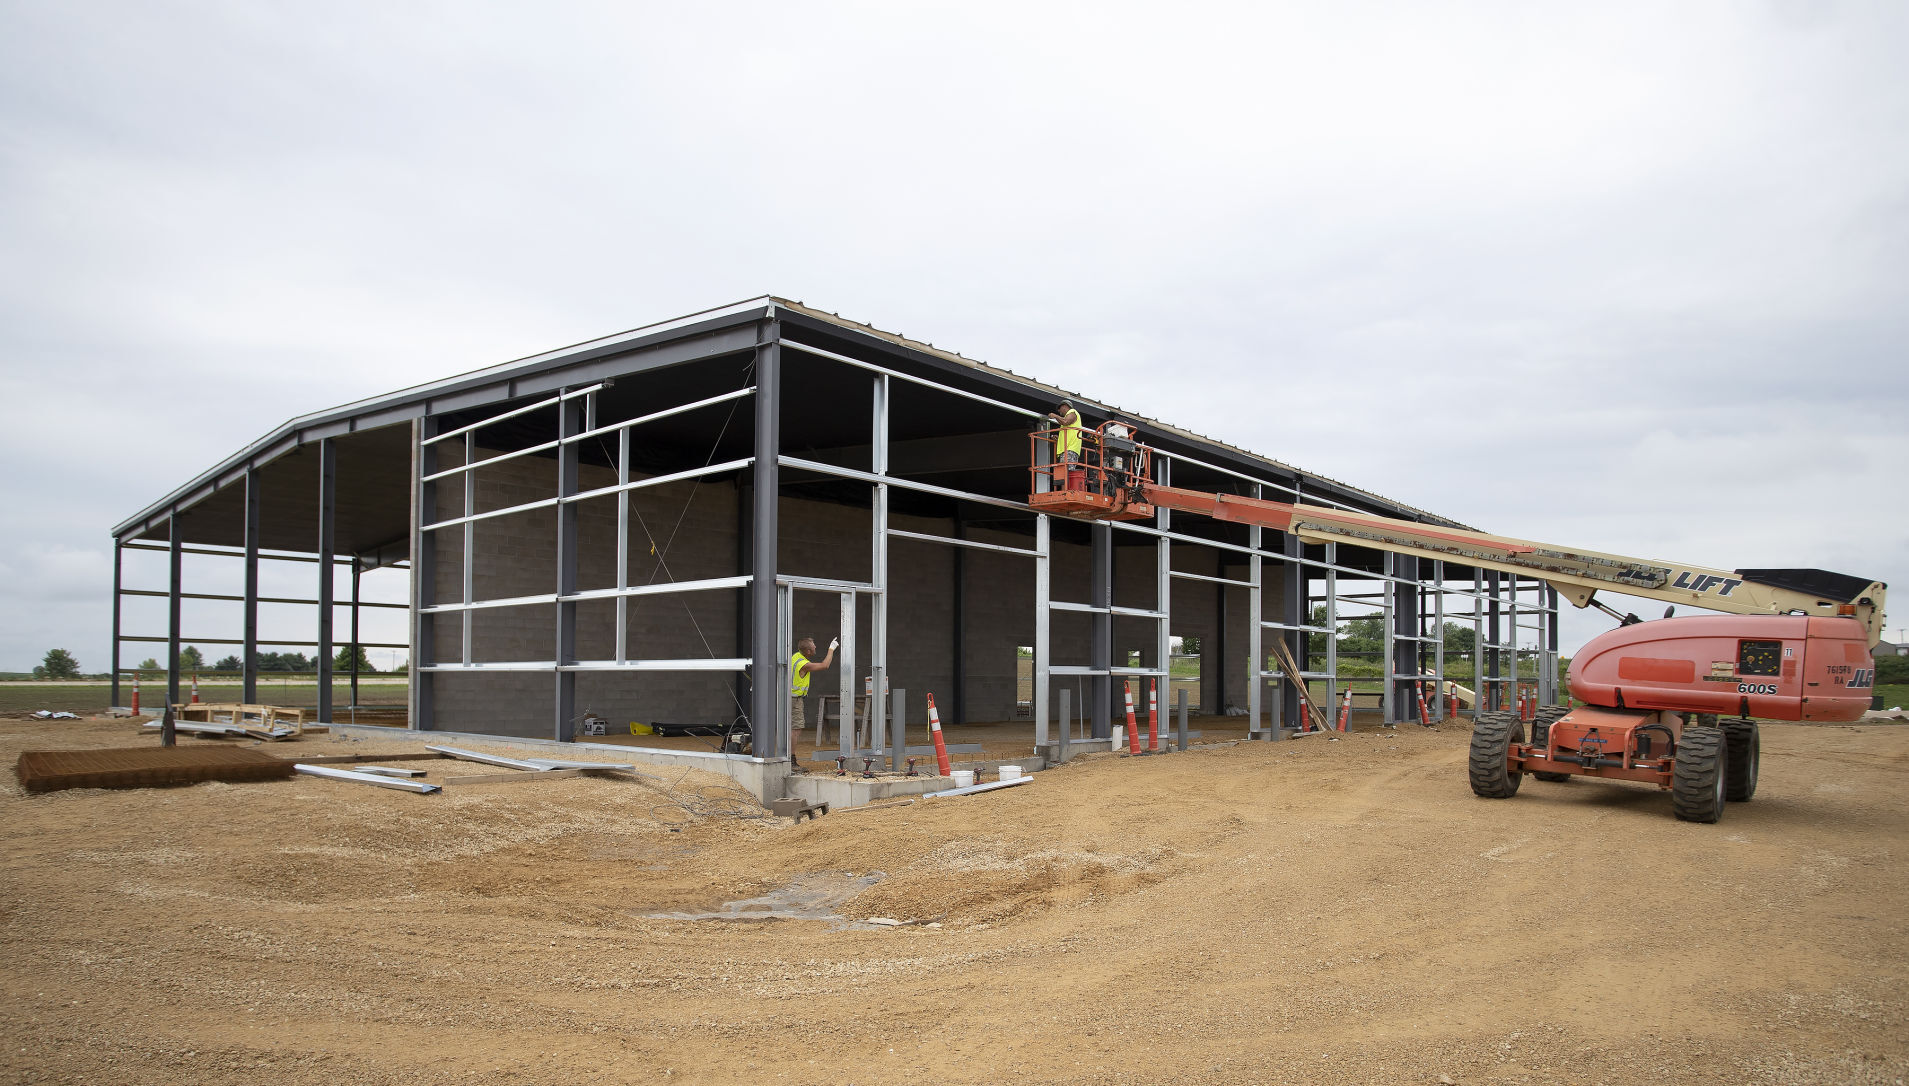 Later this year, Nick’s Powersports will shift to a part of Dickeyville’s new industrial park that is currently under construction.    PHOTO CREDIT: Stephen Gassman, Telegraph Herald